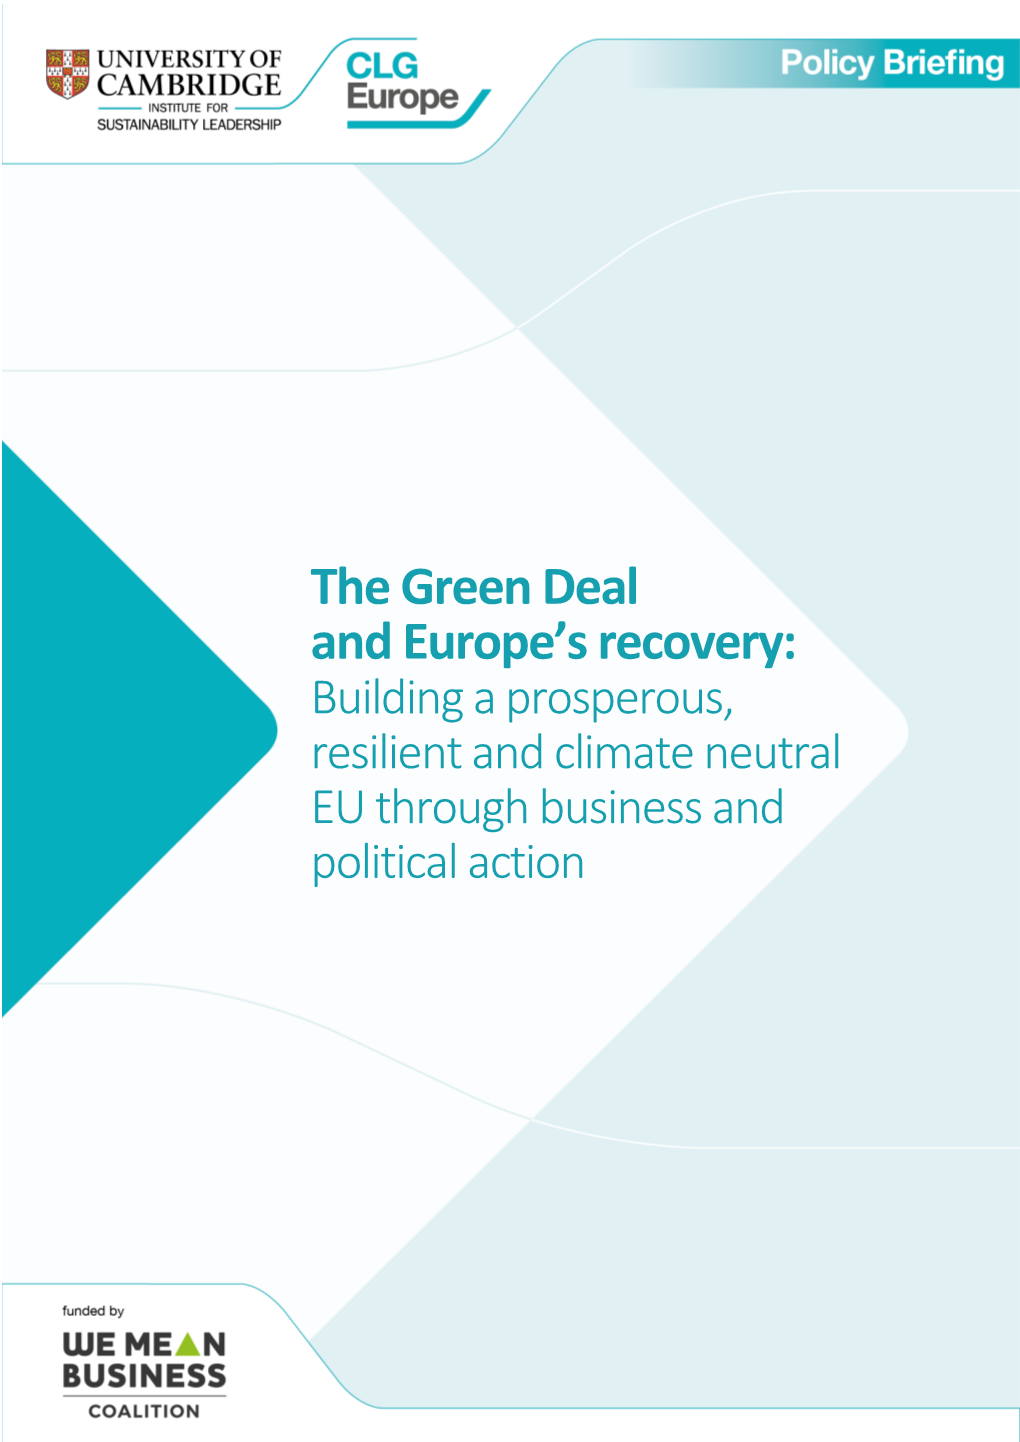 The Green Deal and Europe's Recovery